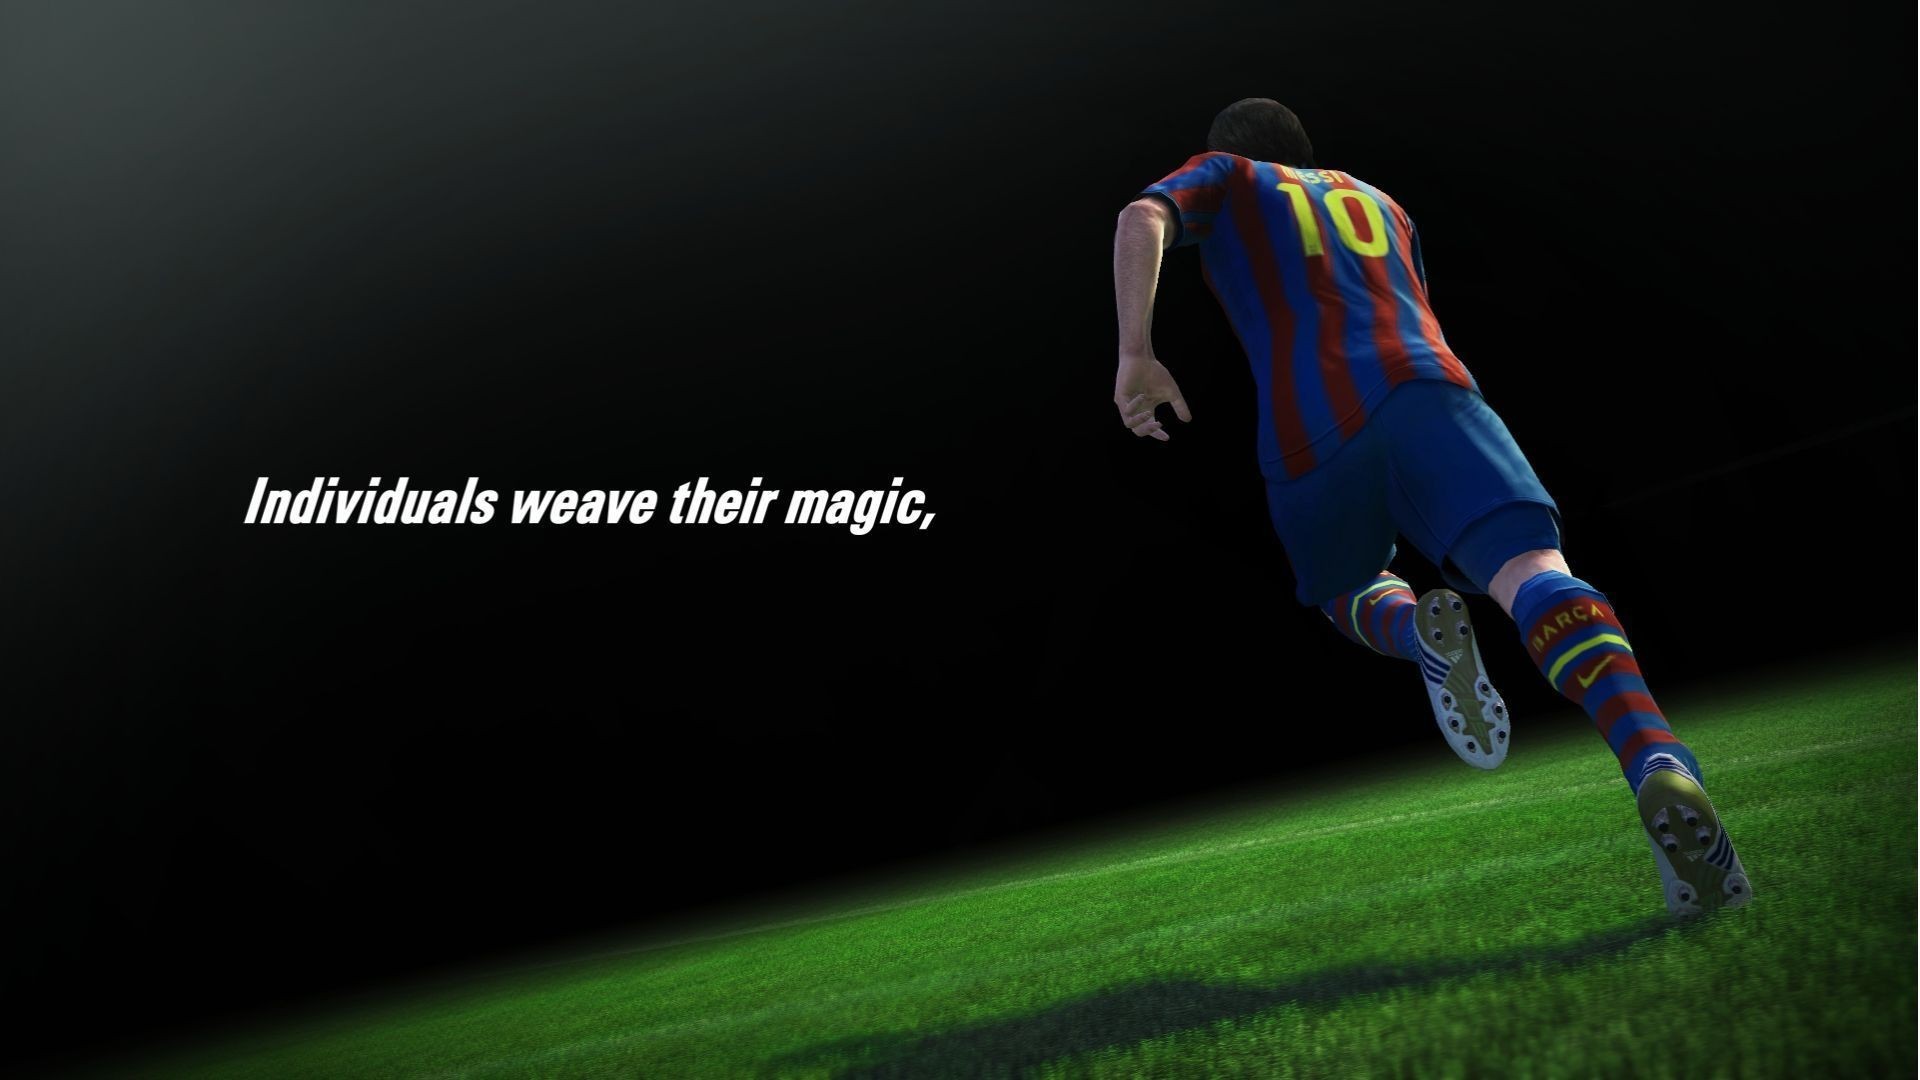 1920x1080 ... Cool Soccer Pictures - HD Wallpapers Backgrounds of Your Choice ...